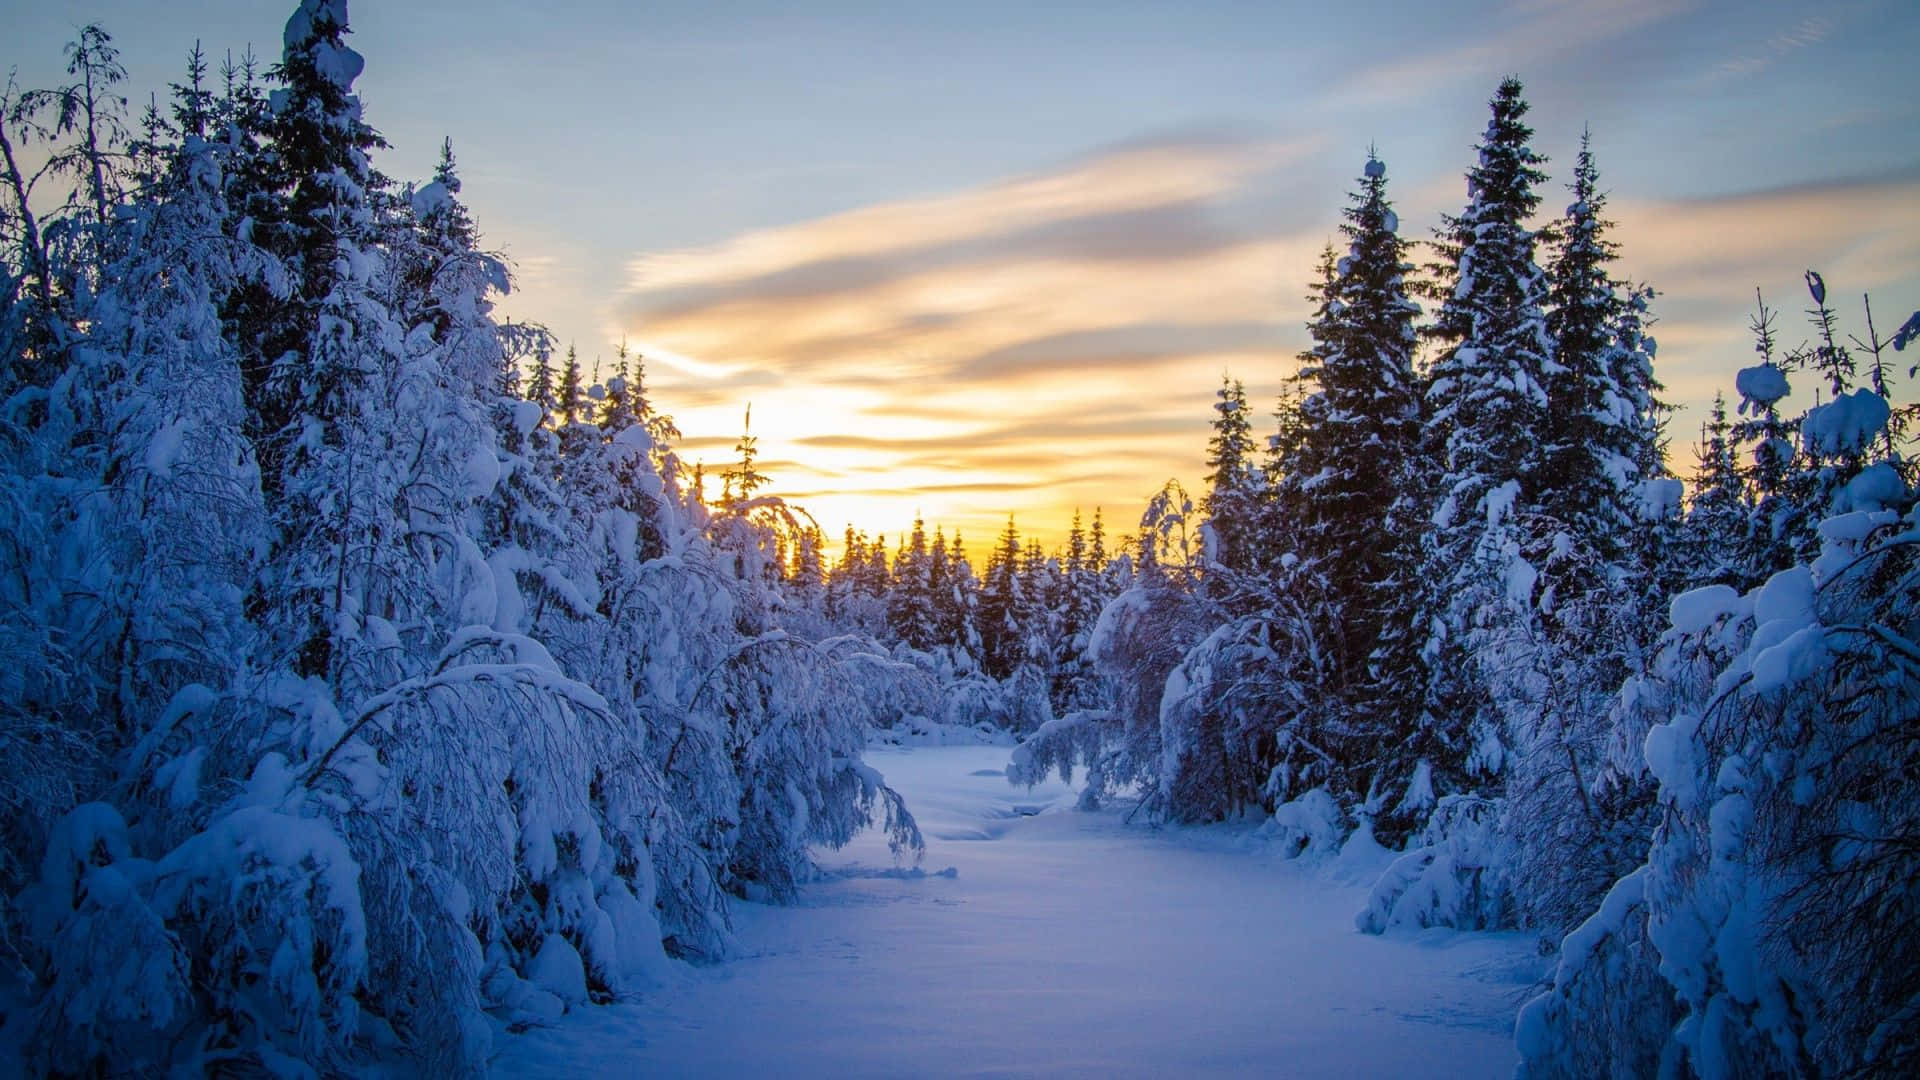 Discover the magic of winter in this picturesque forest" Wallpaper